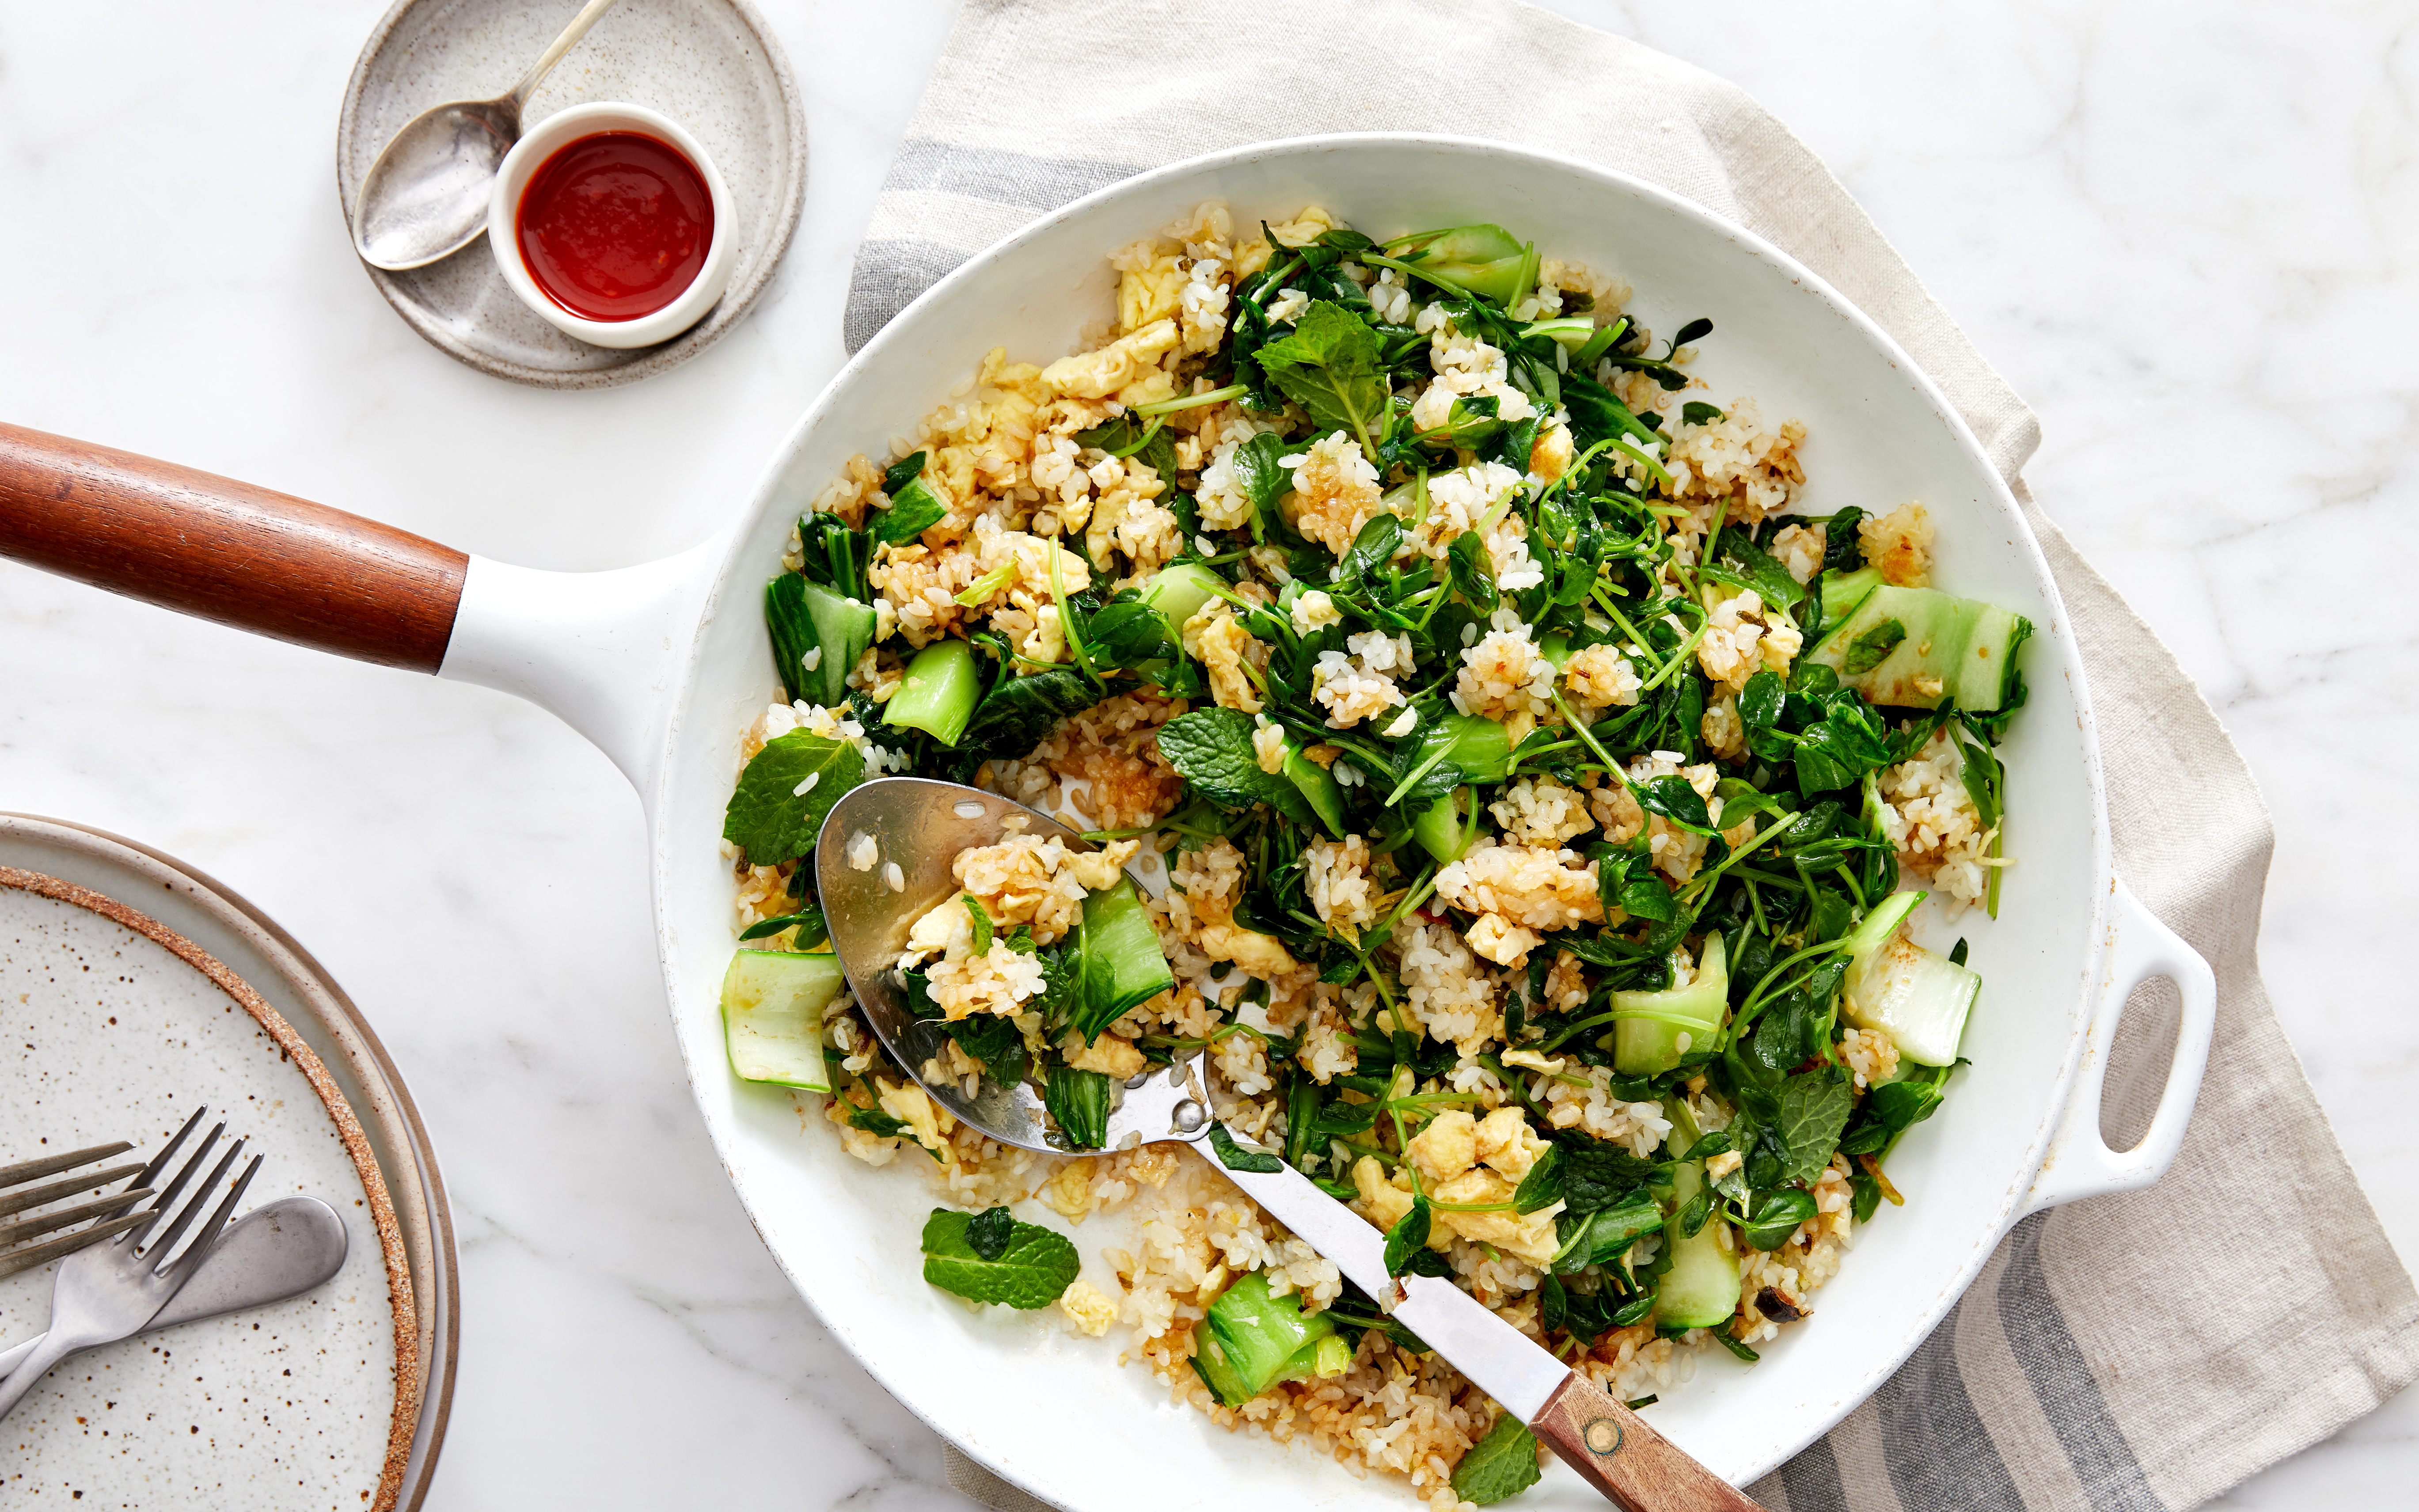 Stir-fried rice with bok choy, mint, and watercress in a white skillet, served with a side of Sriracha sauce.